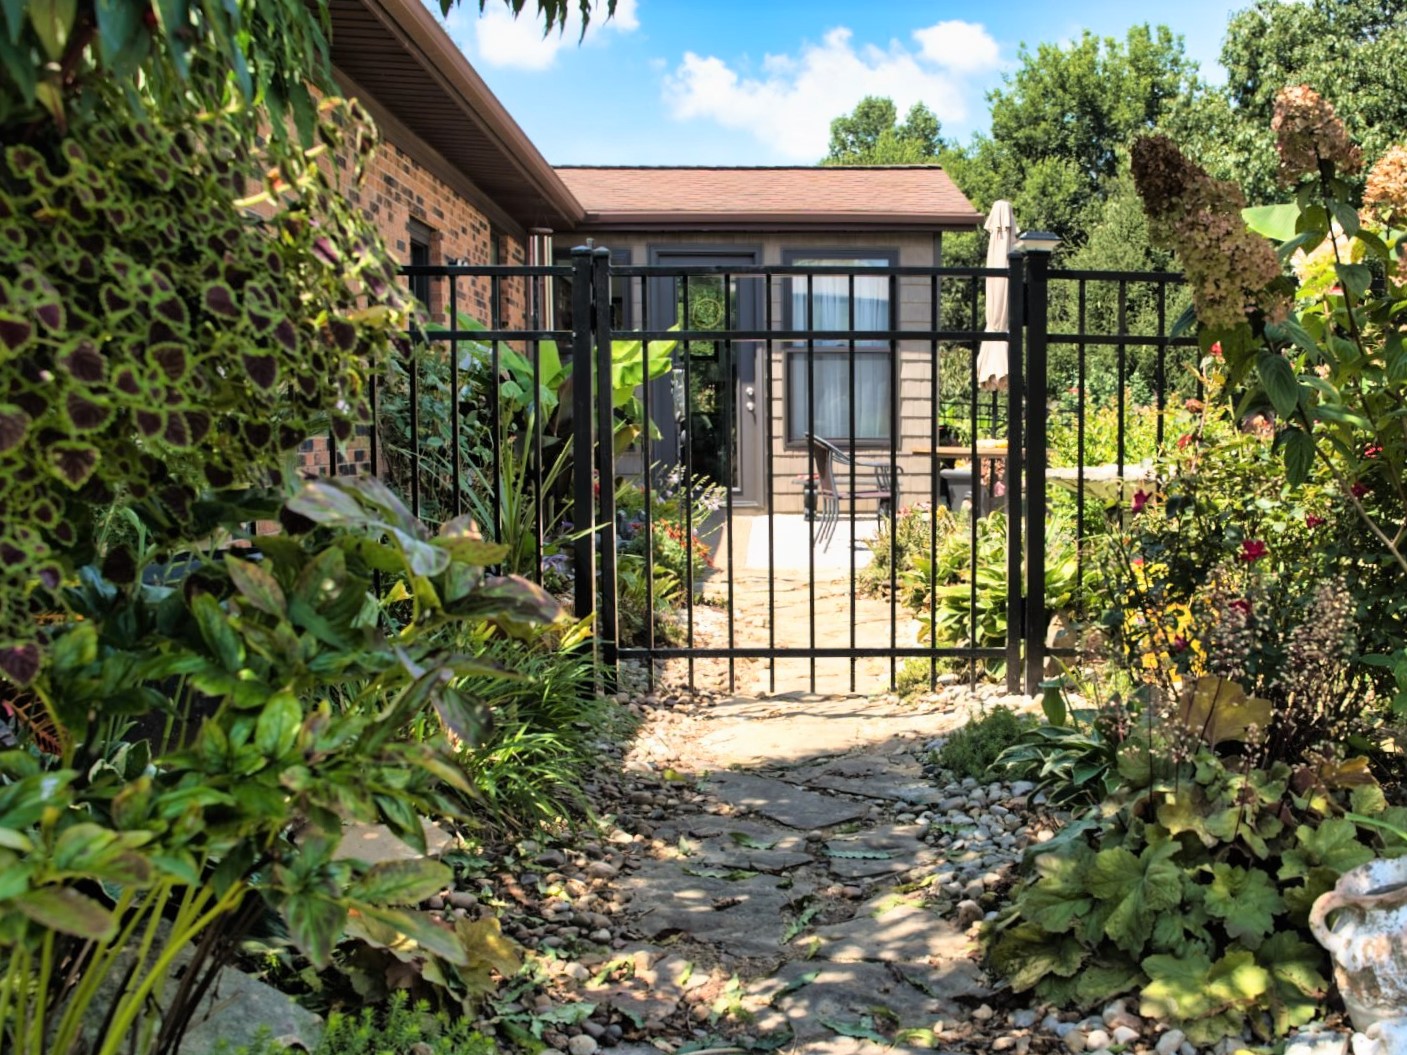 Photo of an aluminum fence and gate at a home entryway